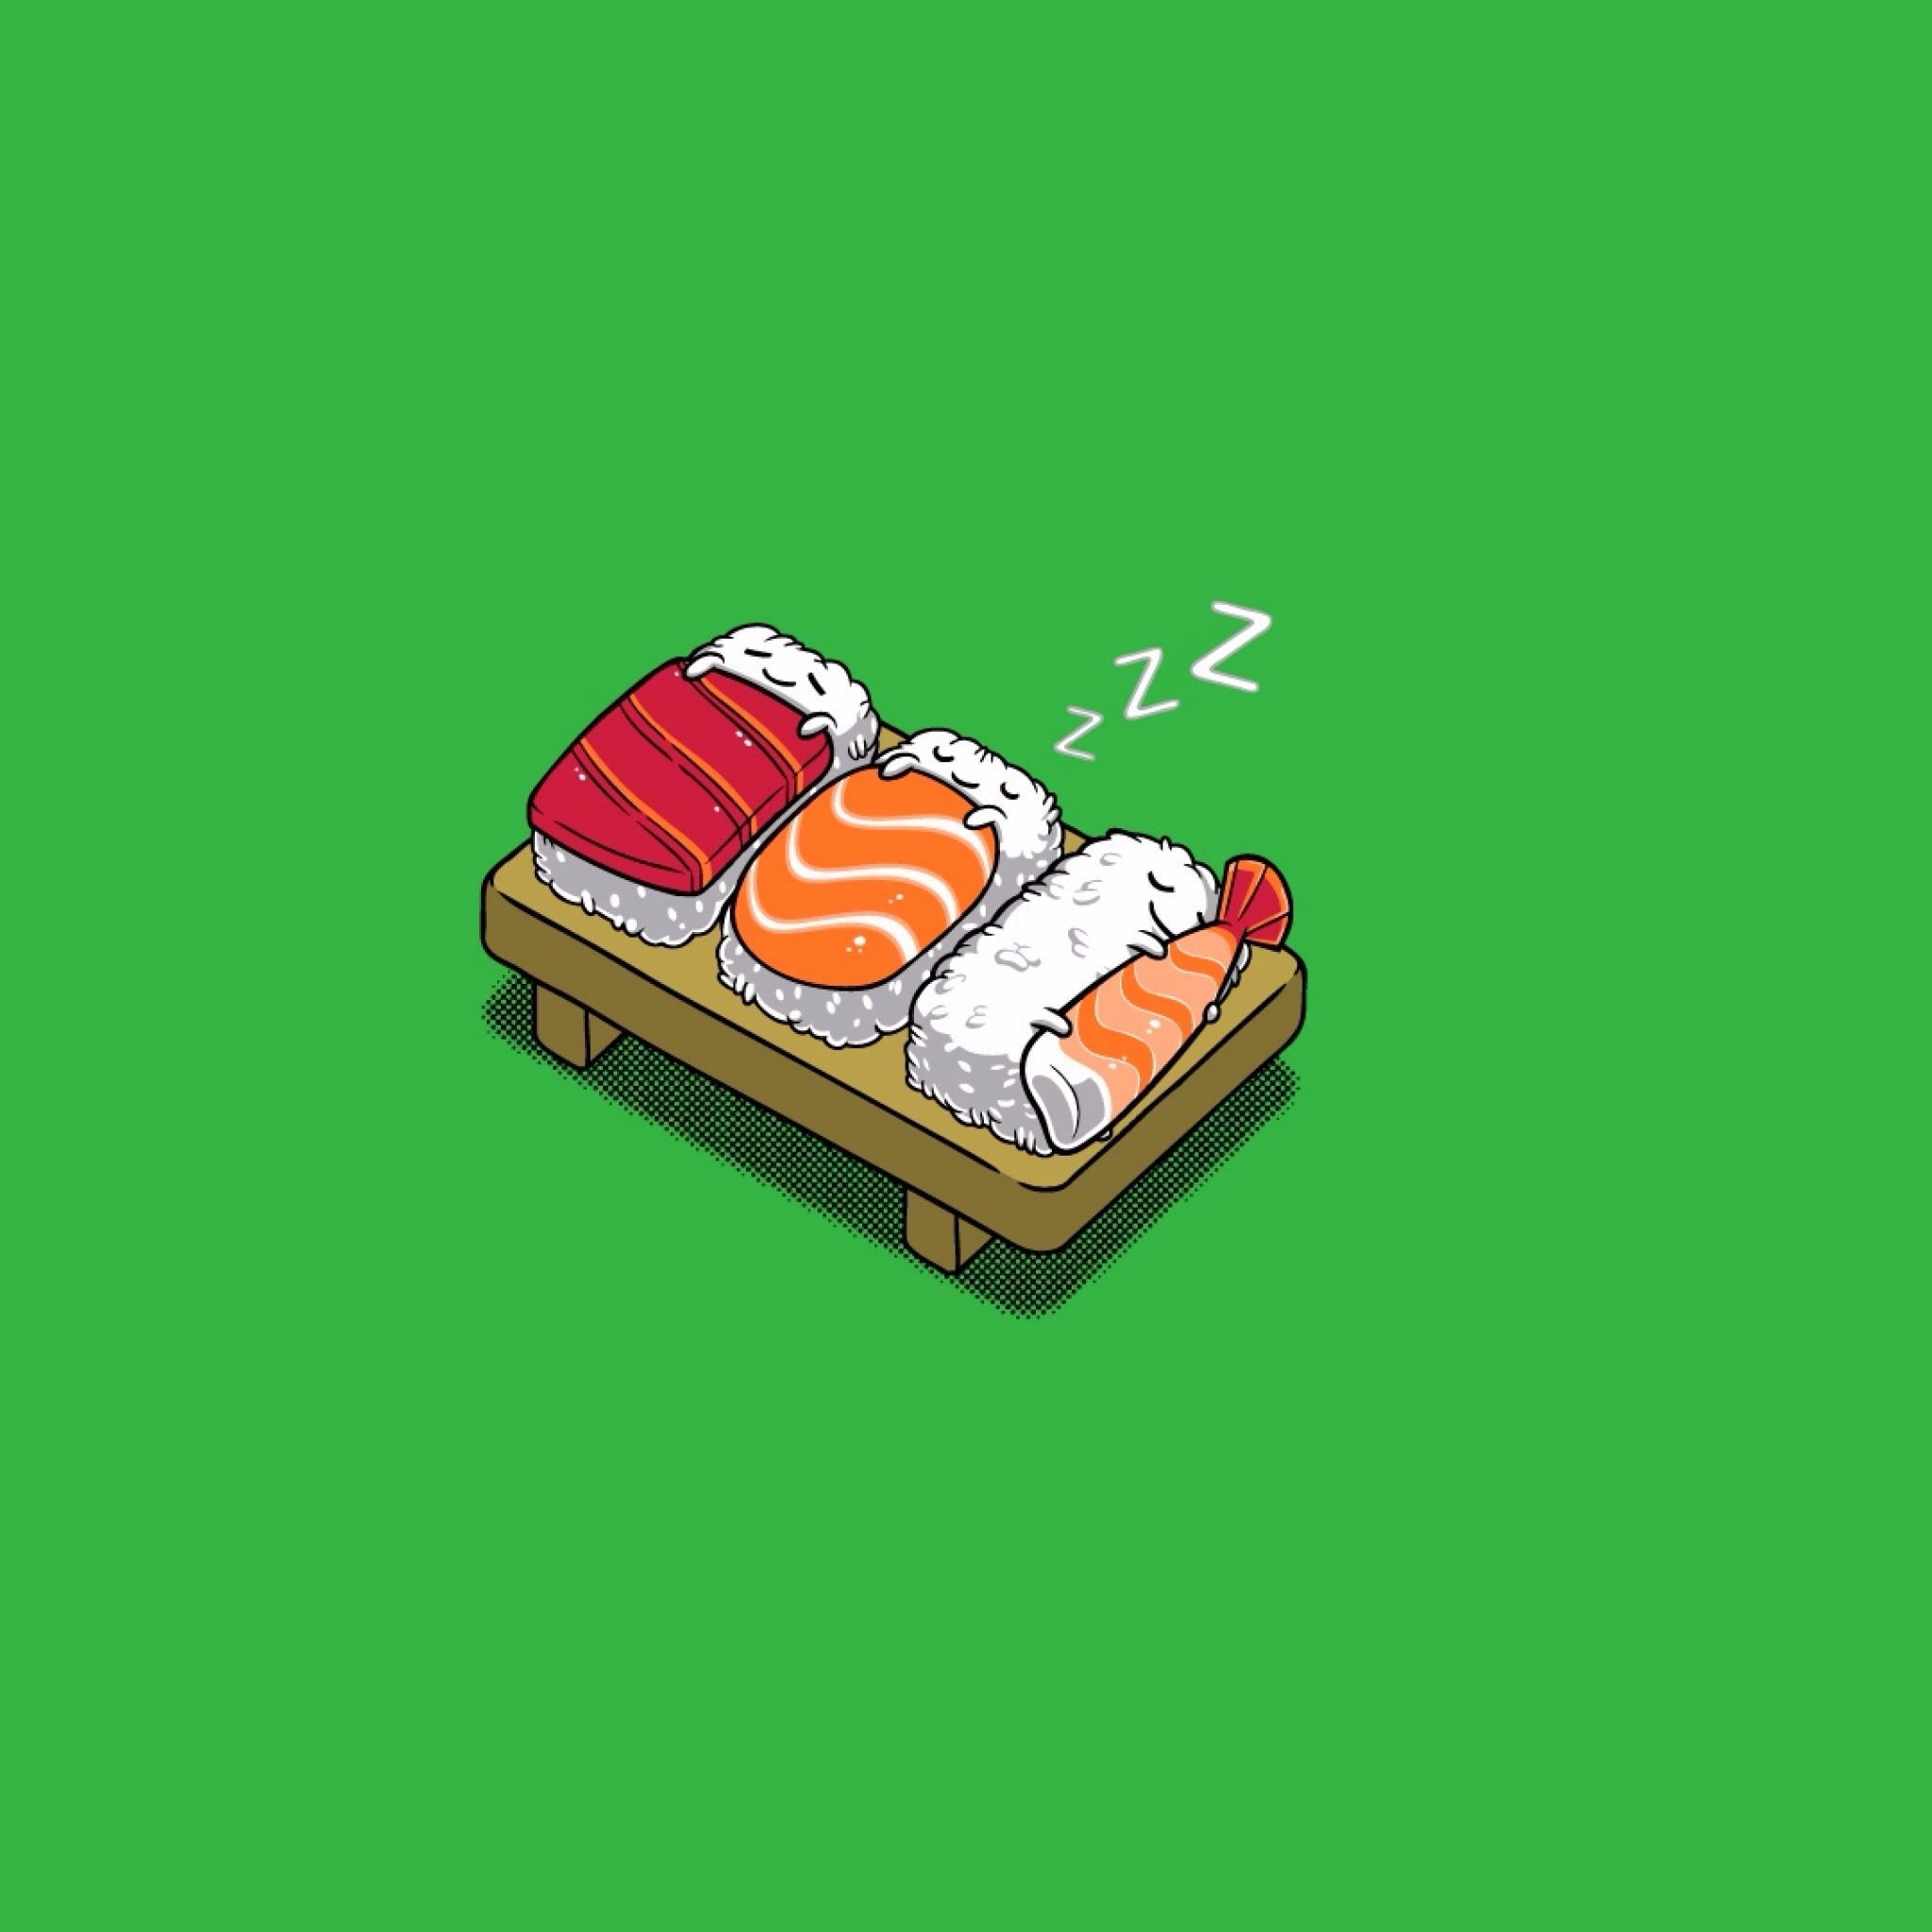 Cute sushi s on